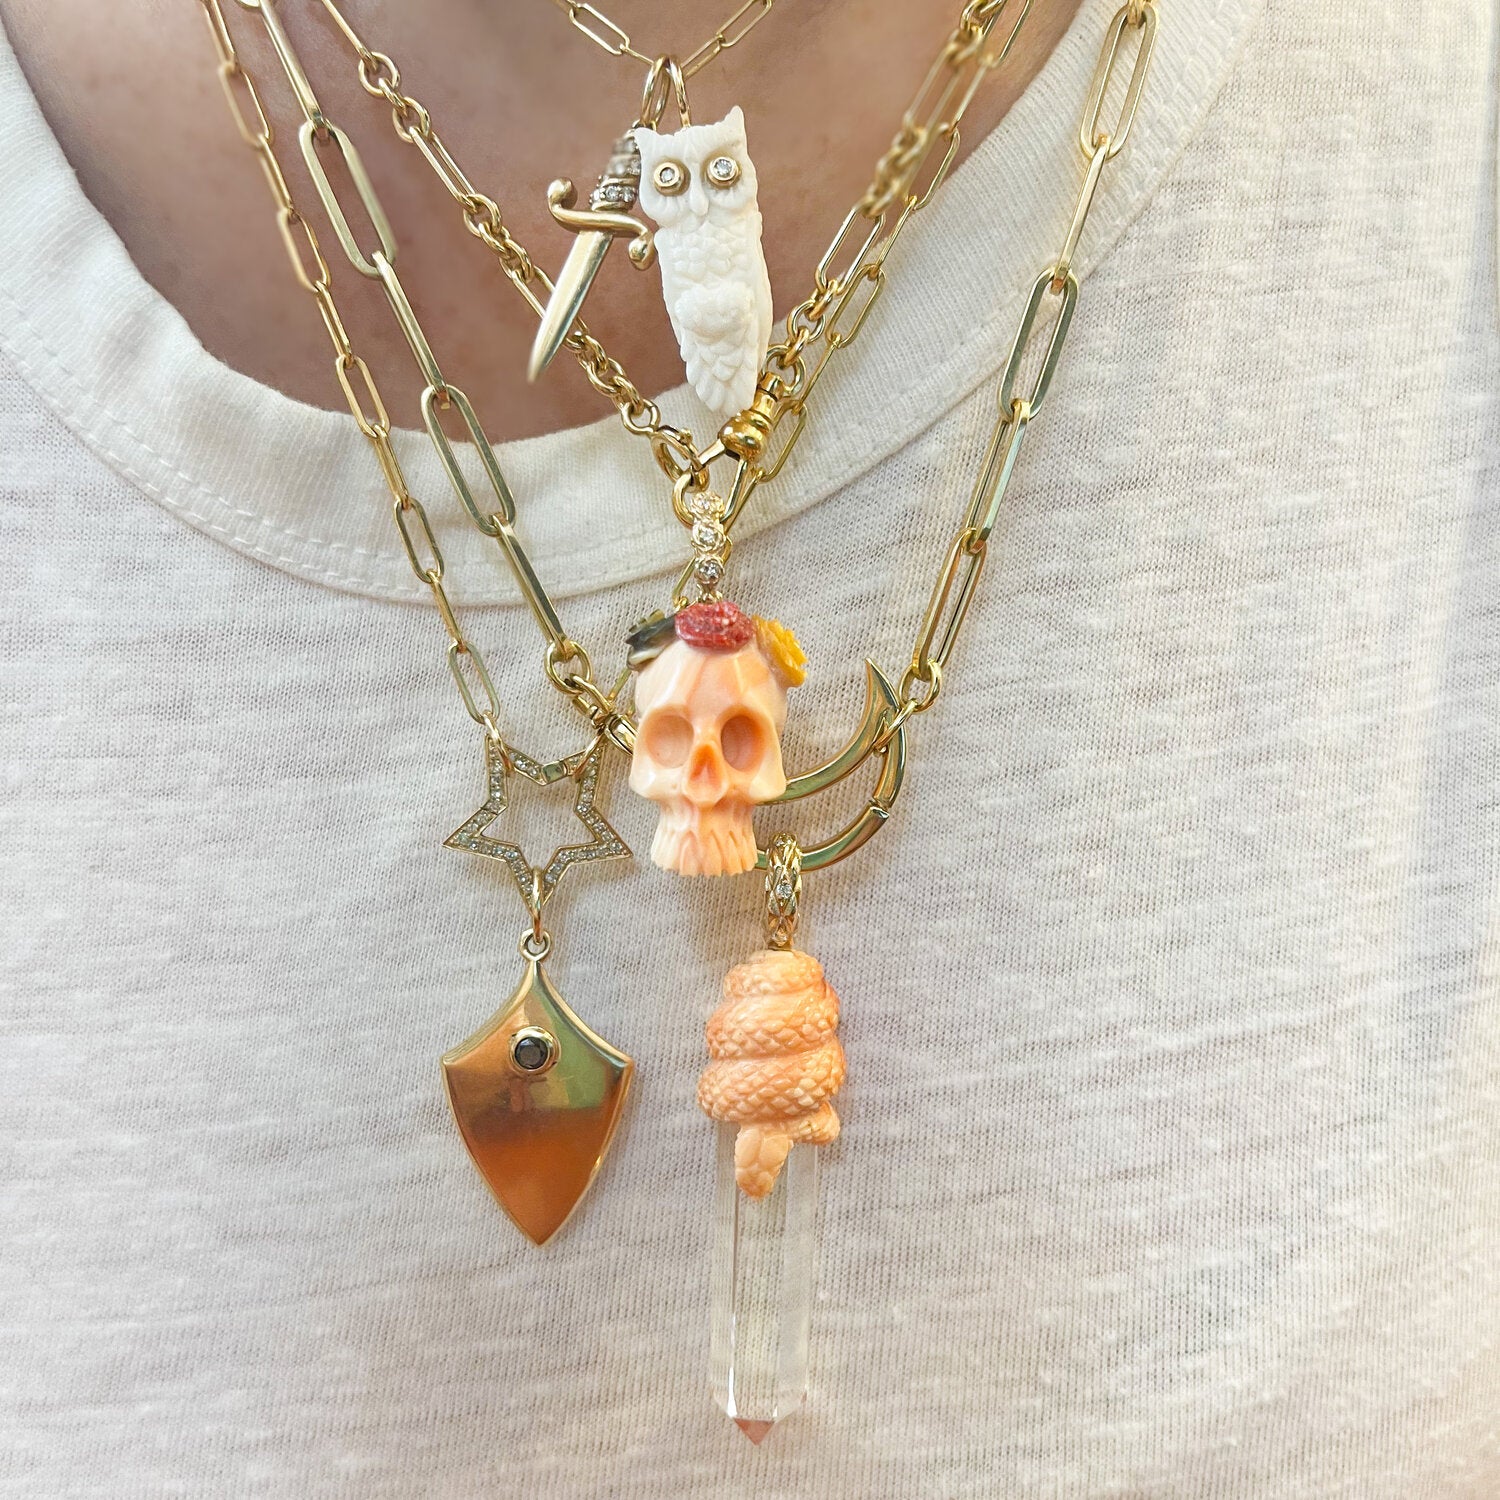 Clear crystal with light orange snake coiled about its top with gold bail shown worn on chain with other Maura Green necklaces around it